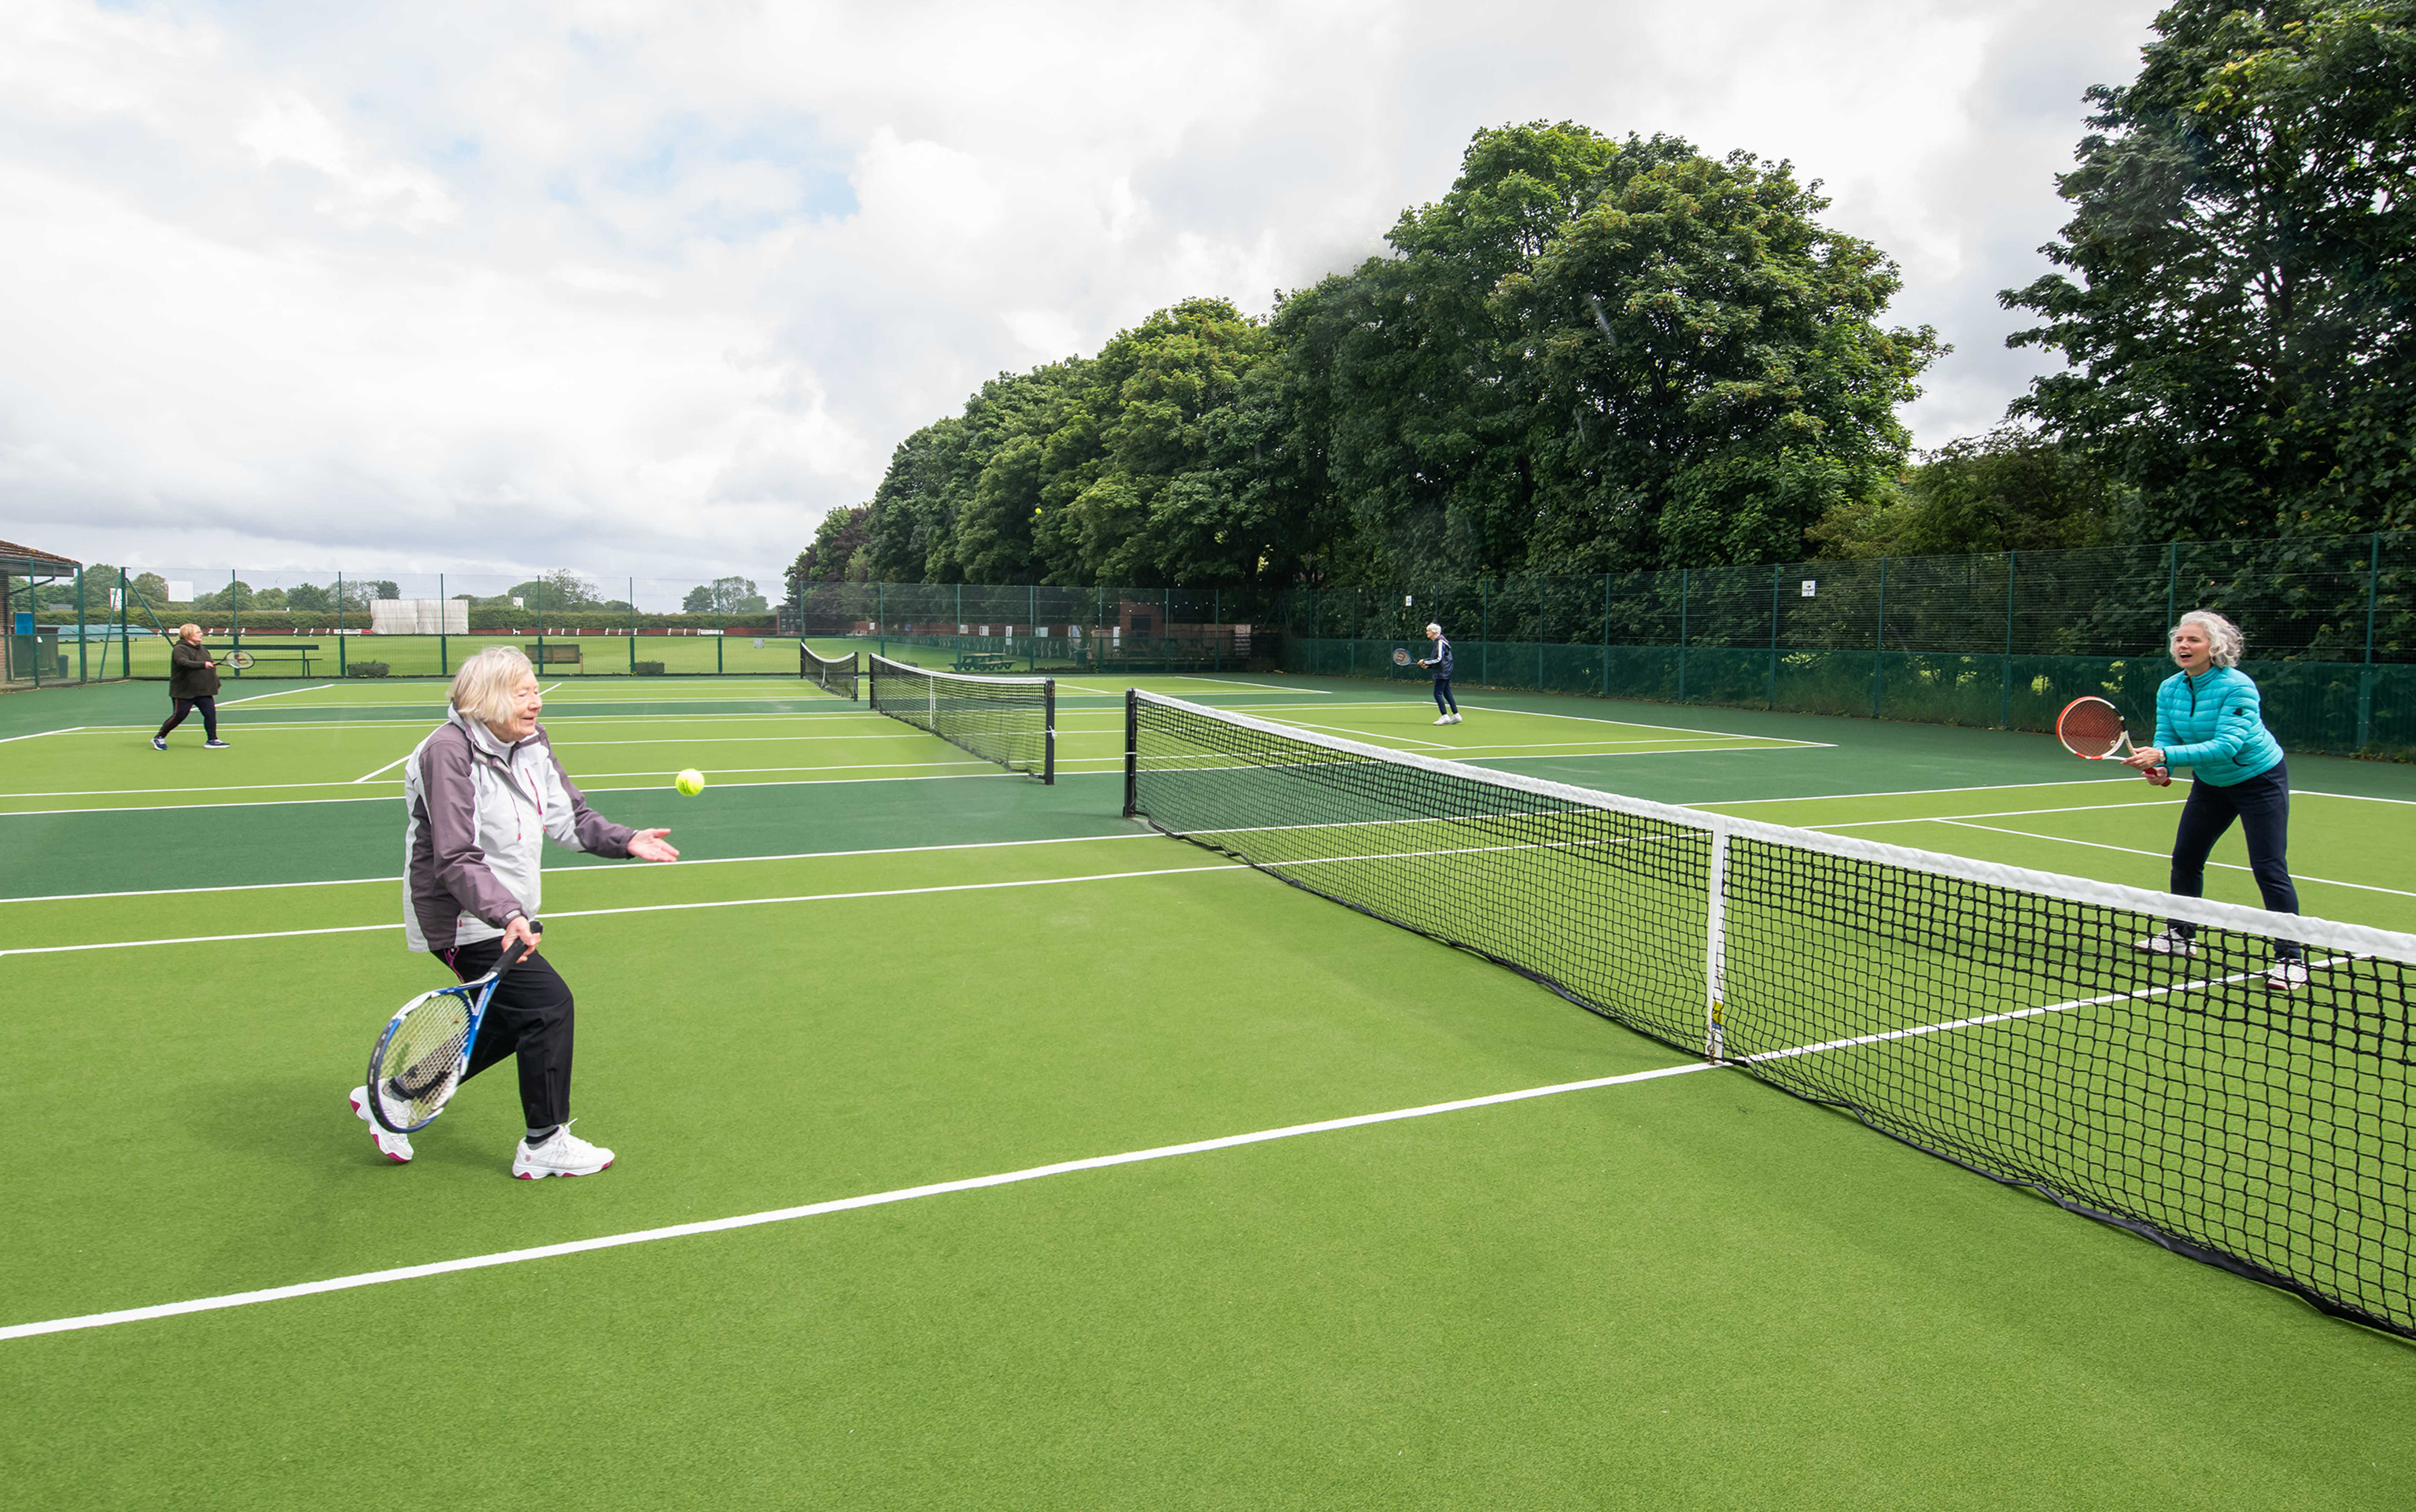 Members of a Rusty Racquets session play a game of tennis on the newly resurfaced courts in Stokesley